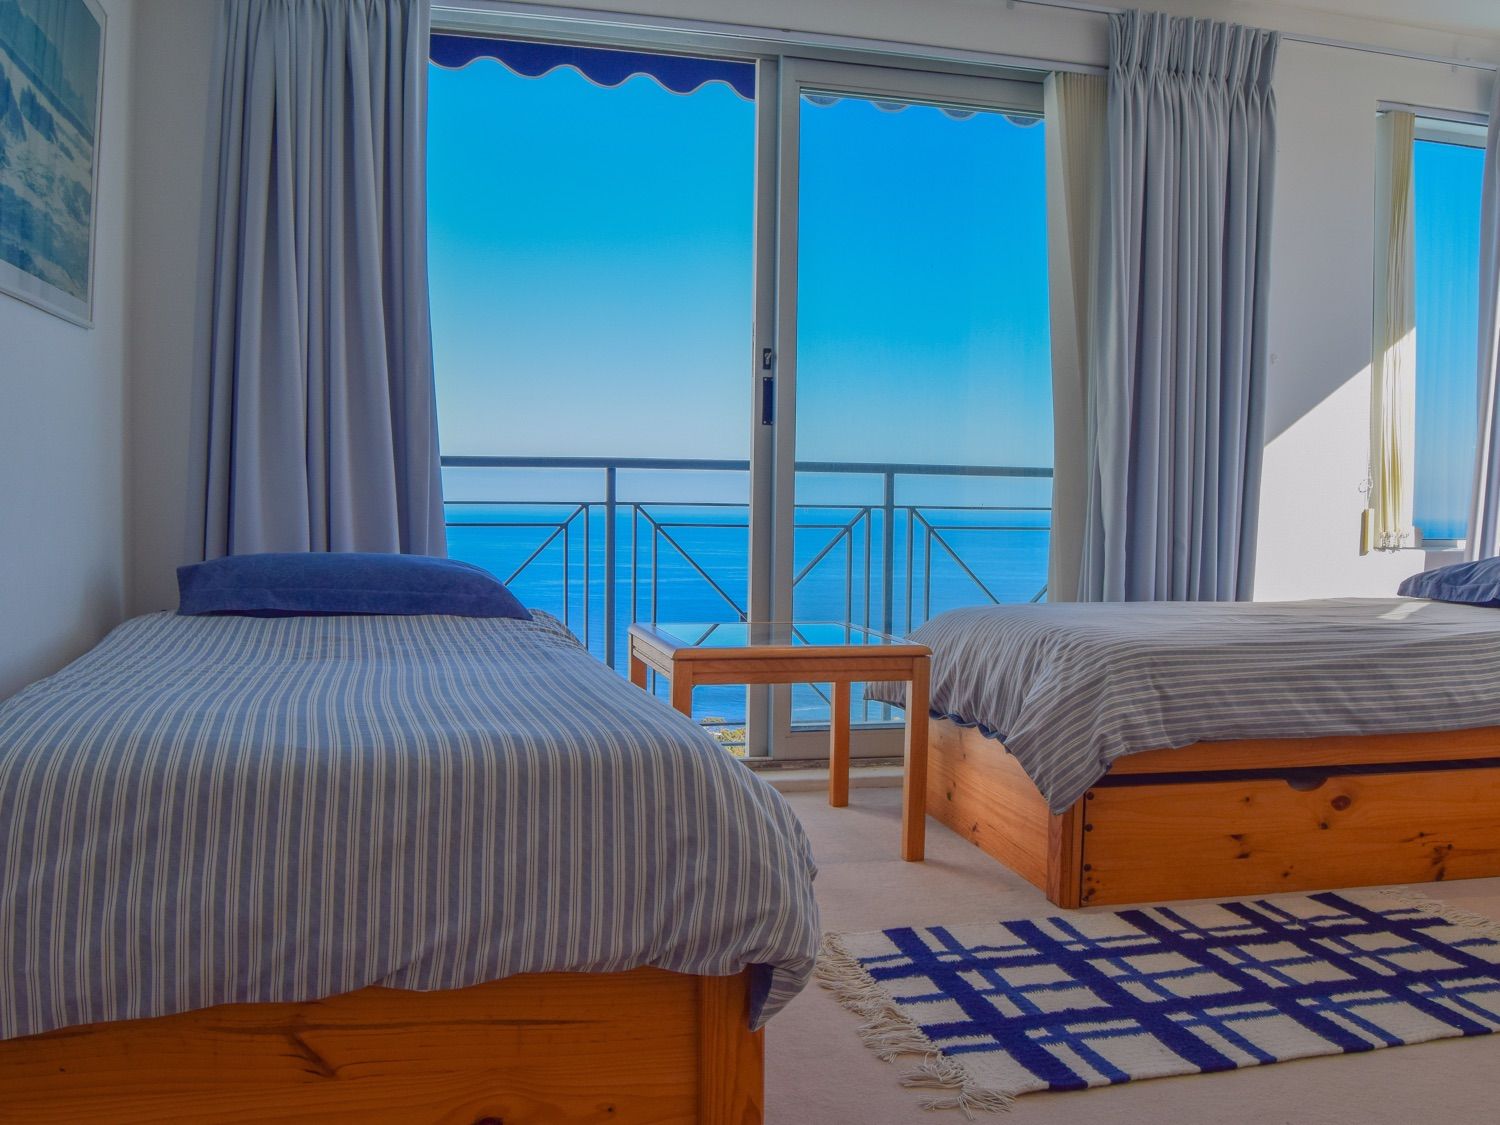 Photo 18 of Oceanscape Camps Bay accommodation in Camps Bay, Cape Town with 4 bedrooms and 4 bathrooms